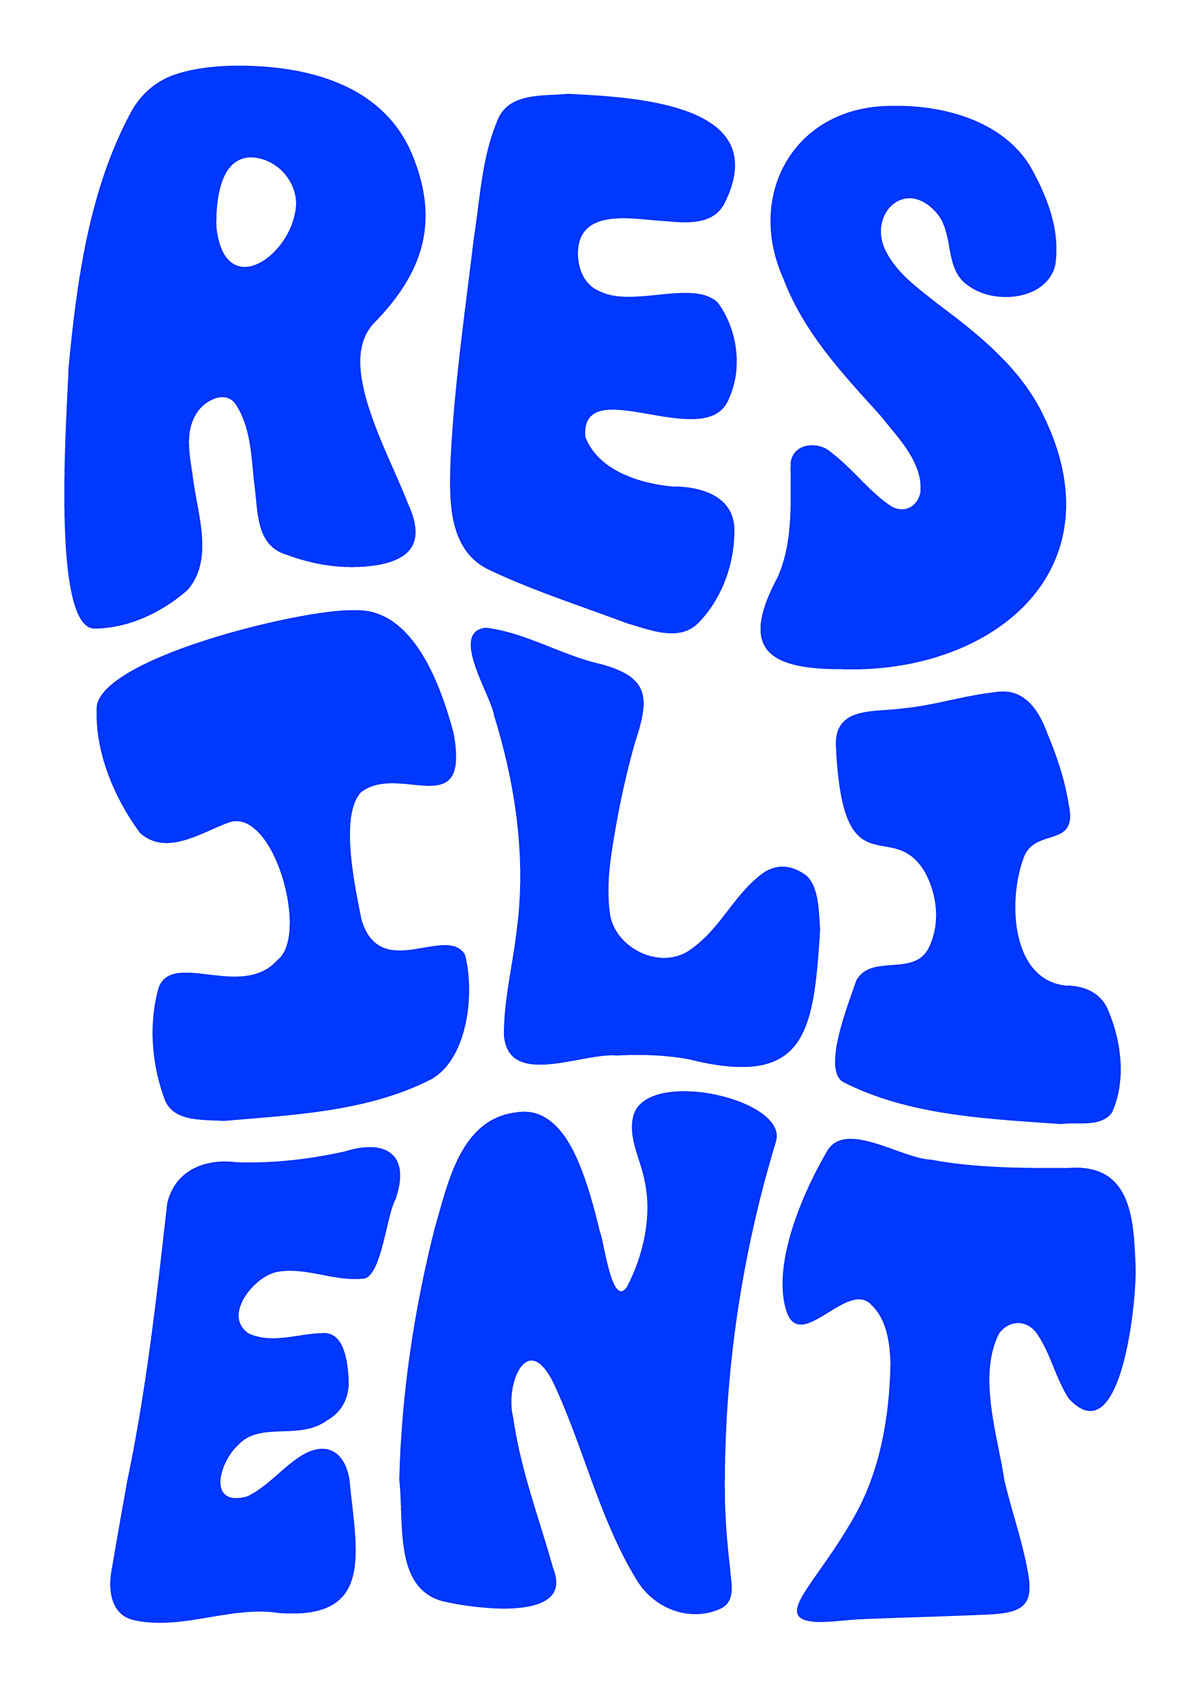 Resilience blue rendition image